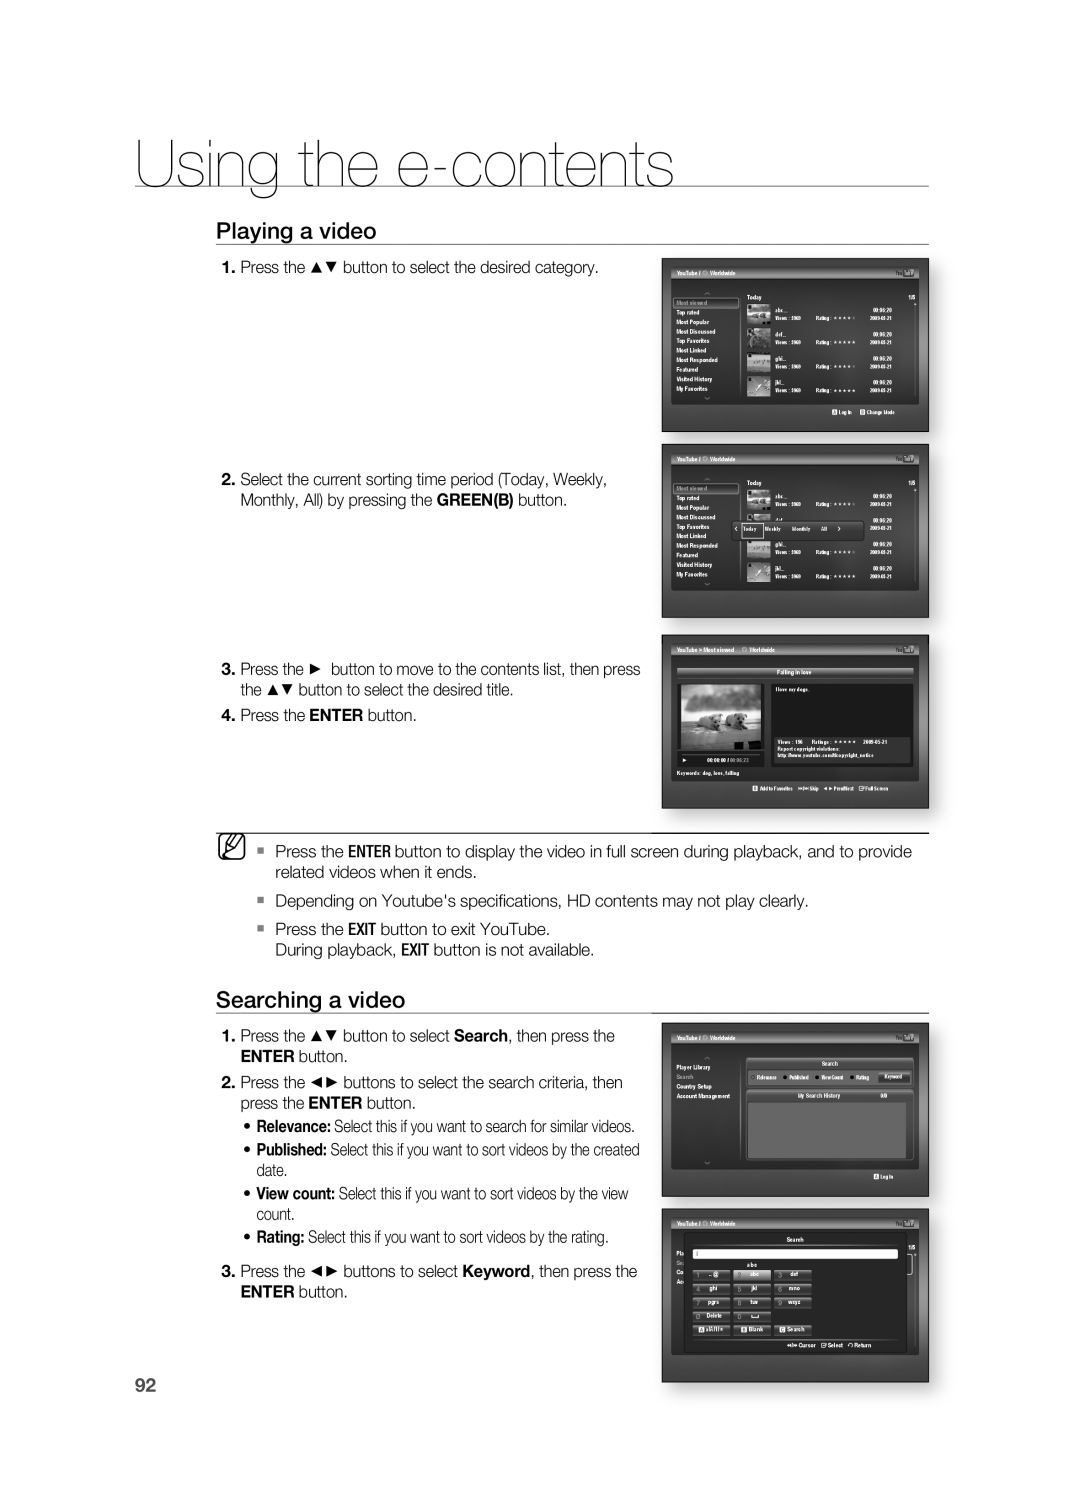 Samsung HT-BD3252 user manual Playing a video, Searching a video, Using the e-contents 